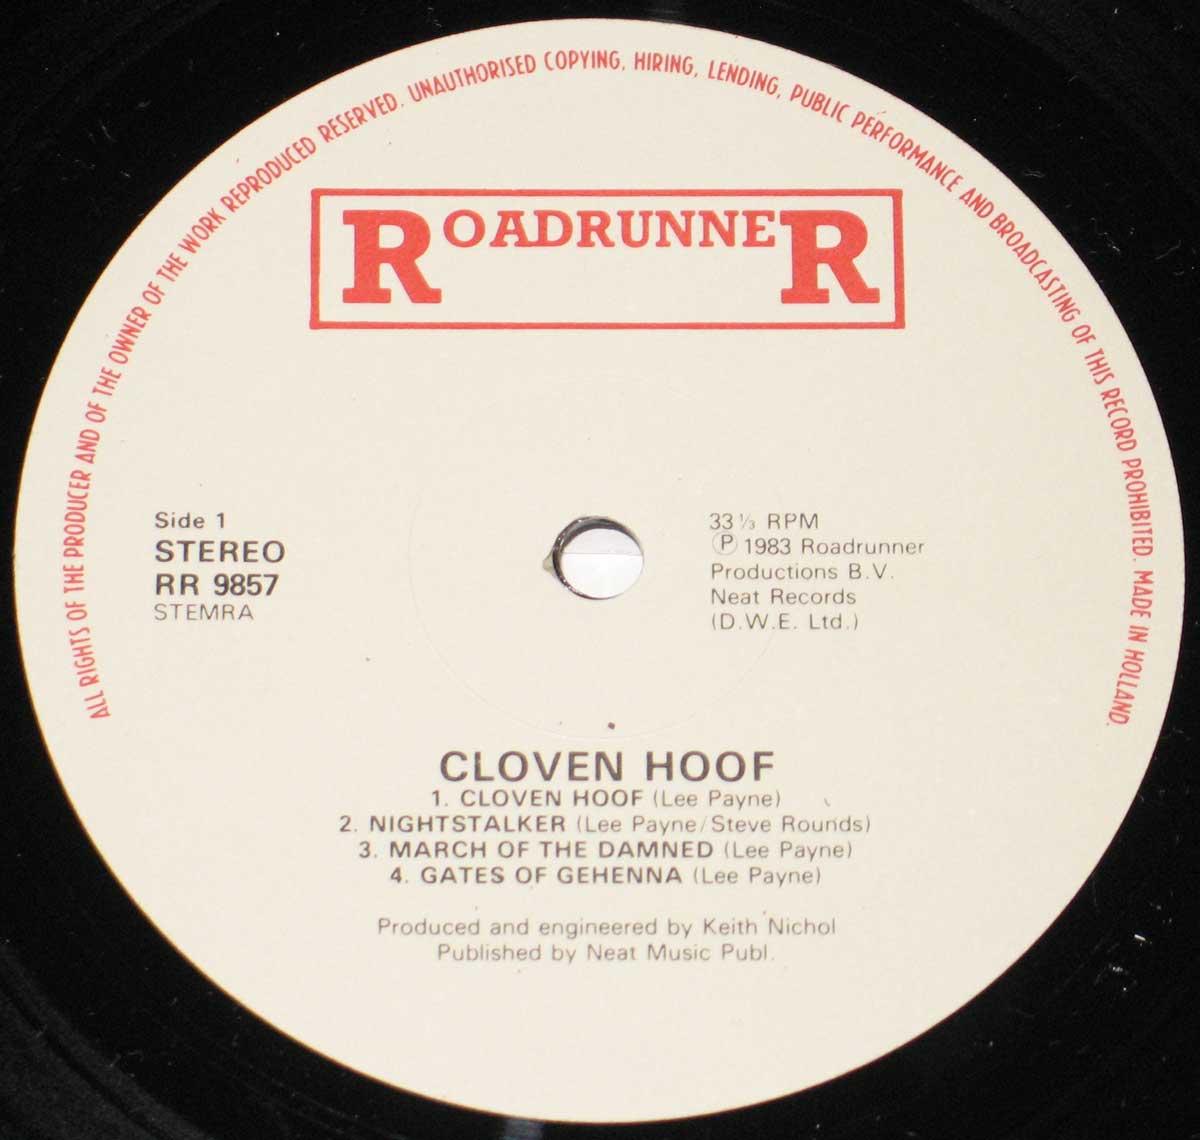 Enlarged High Resolution Photo of the Record's label CLOVEN HOOF Self-Titled https://vinyl-records.nl